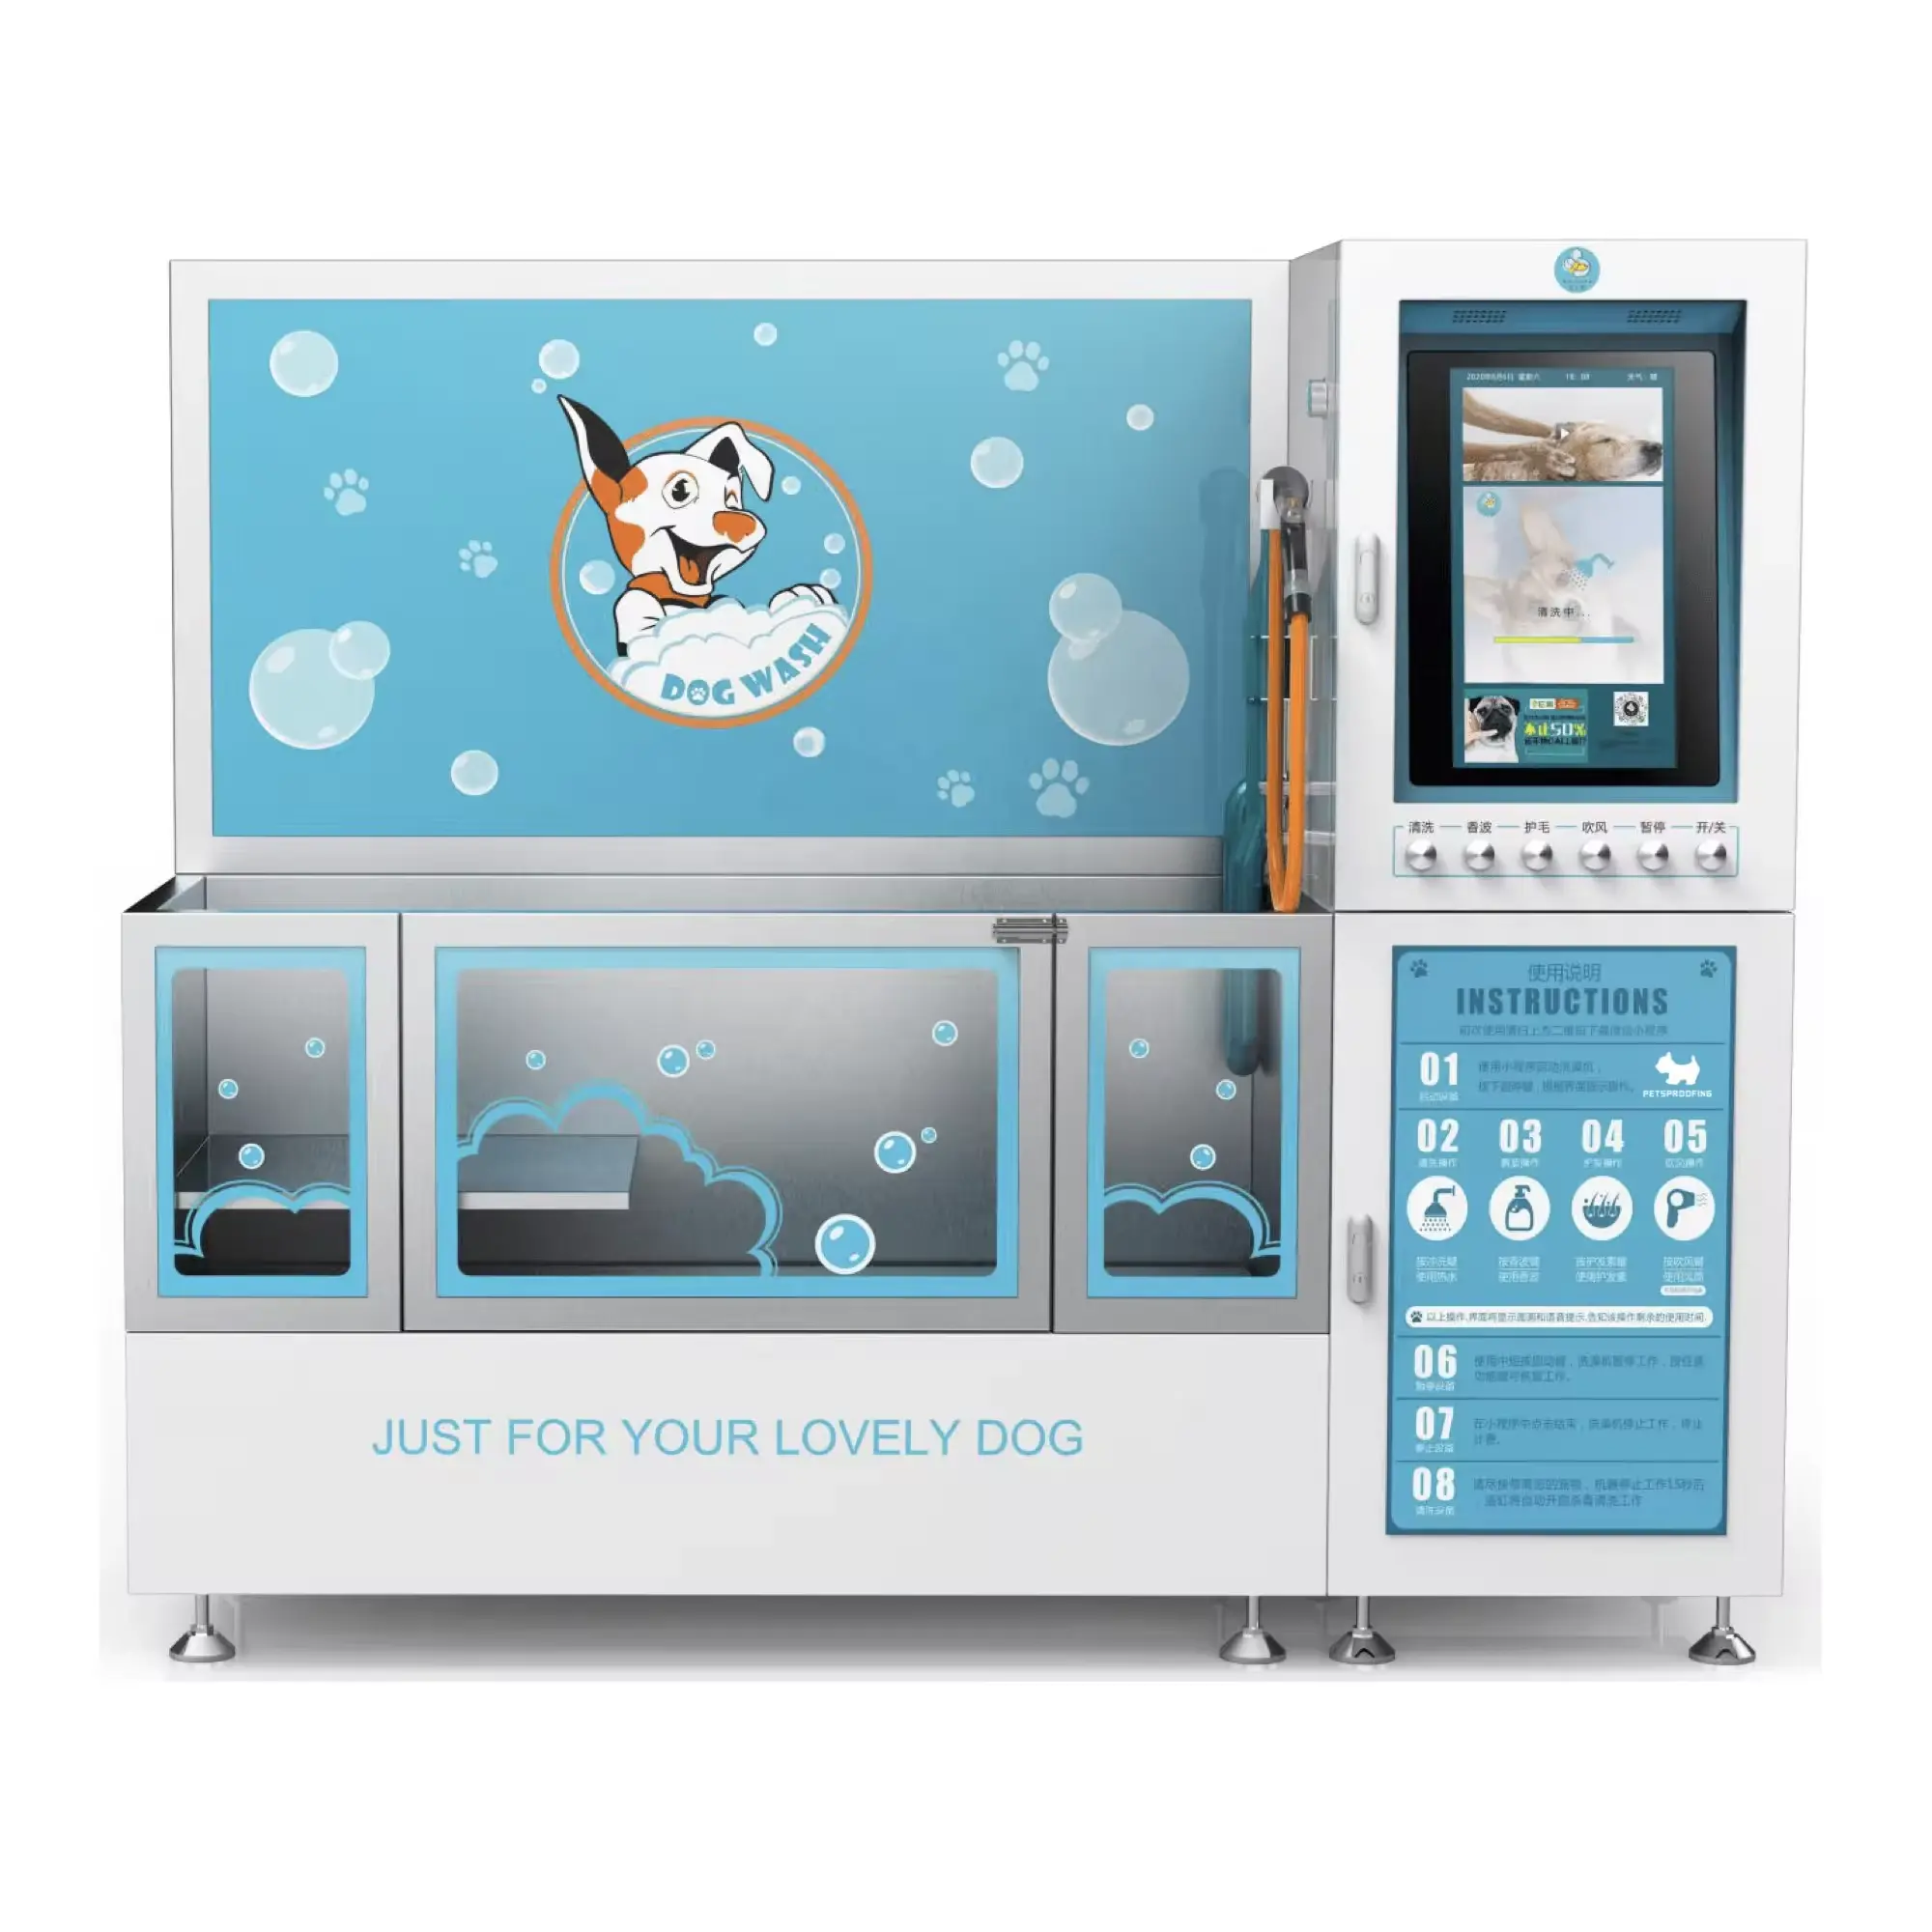 New Invention Dog And Cat Washing Station Self-service Portable Automatic Cat and Dog Grooming Bath Machine